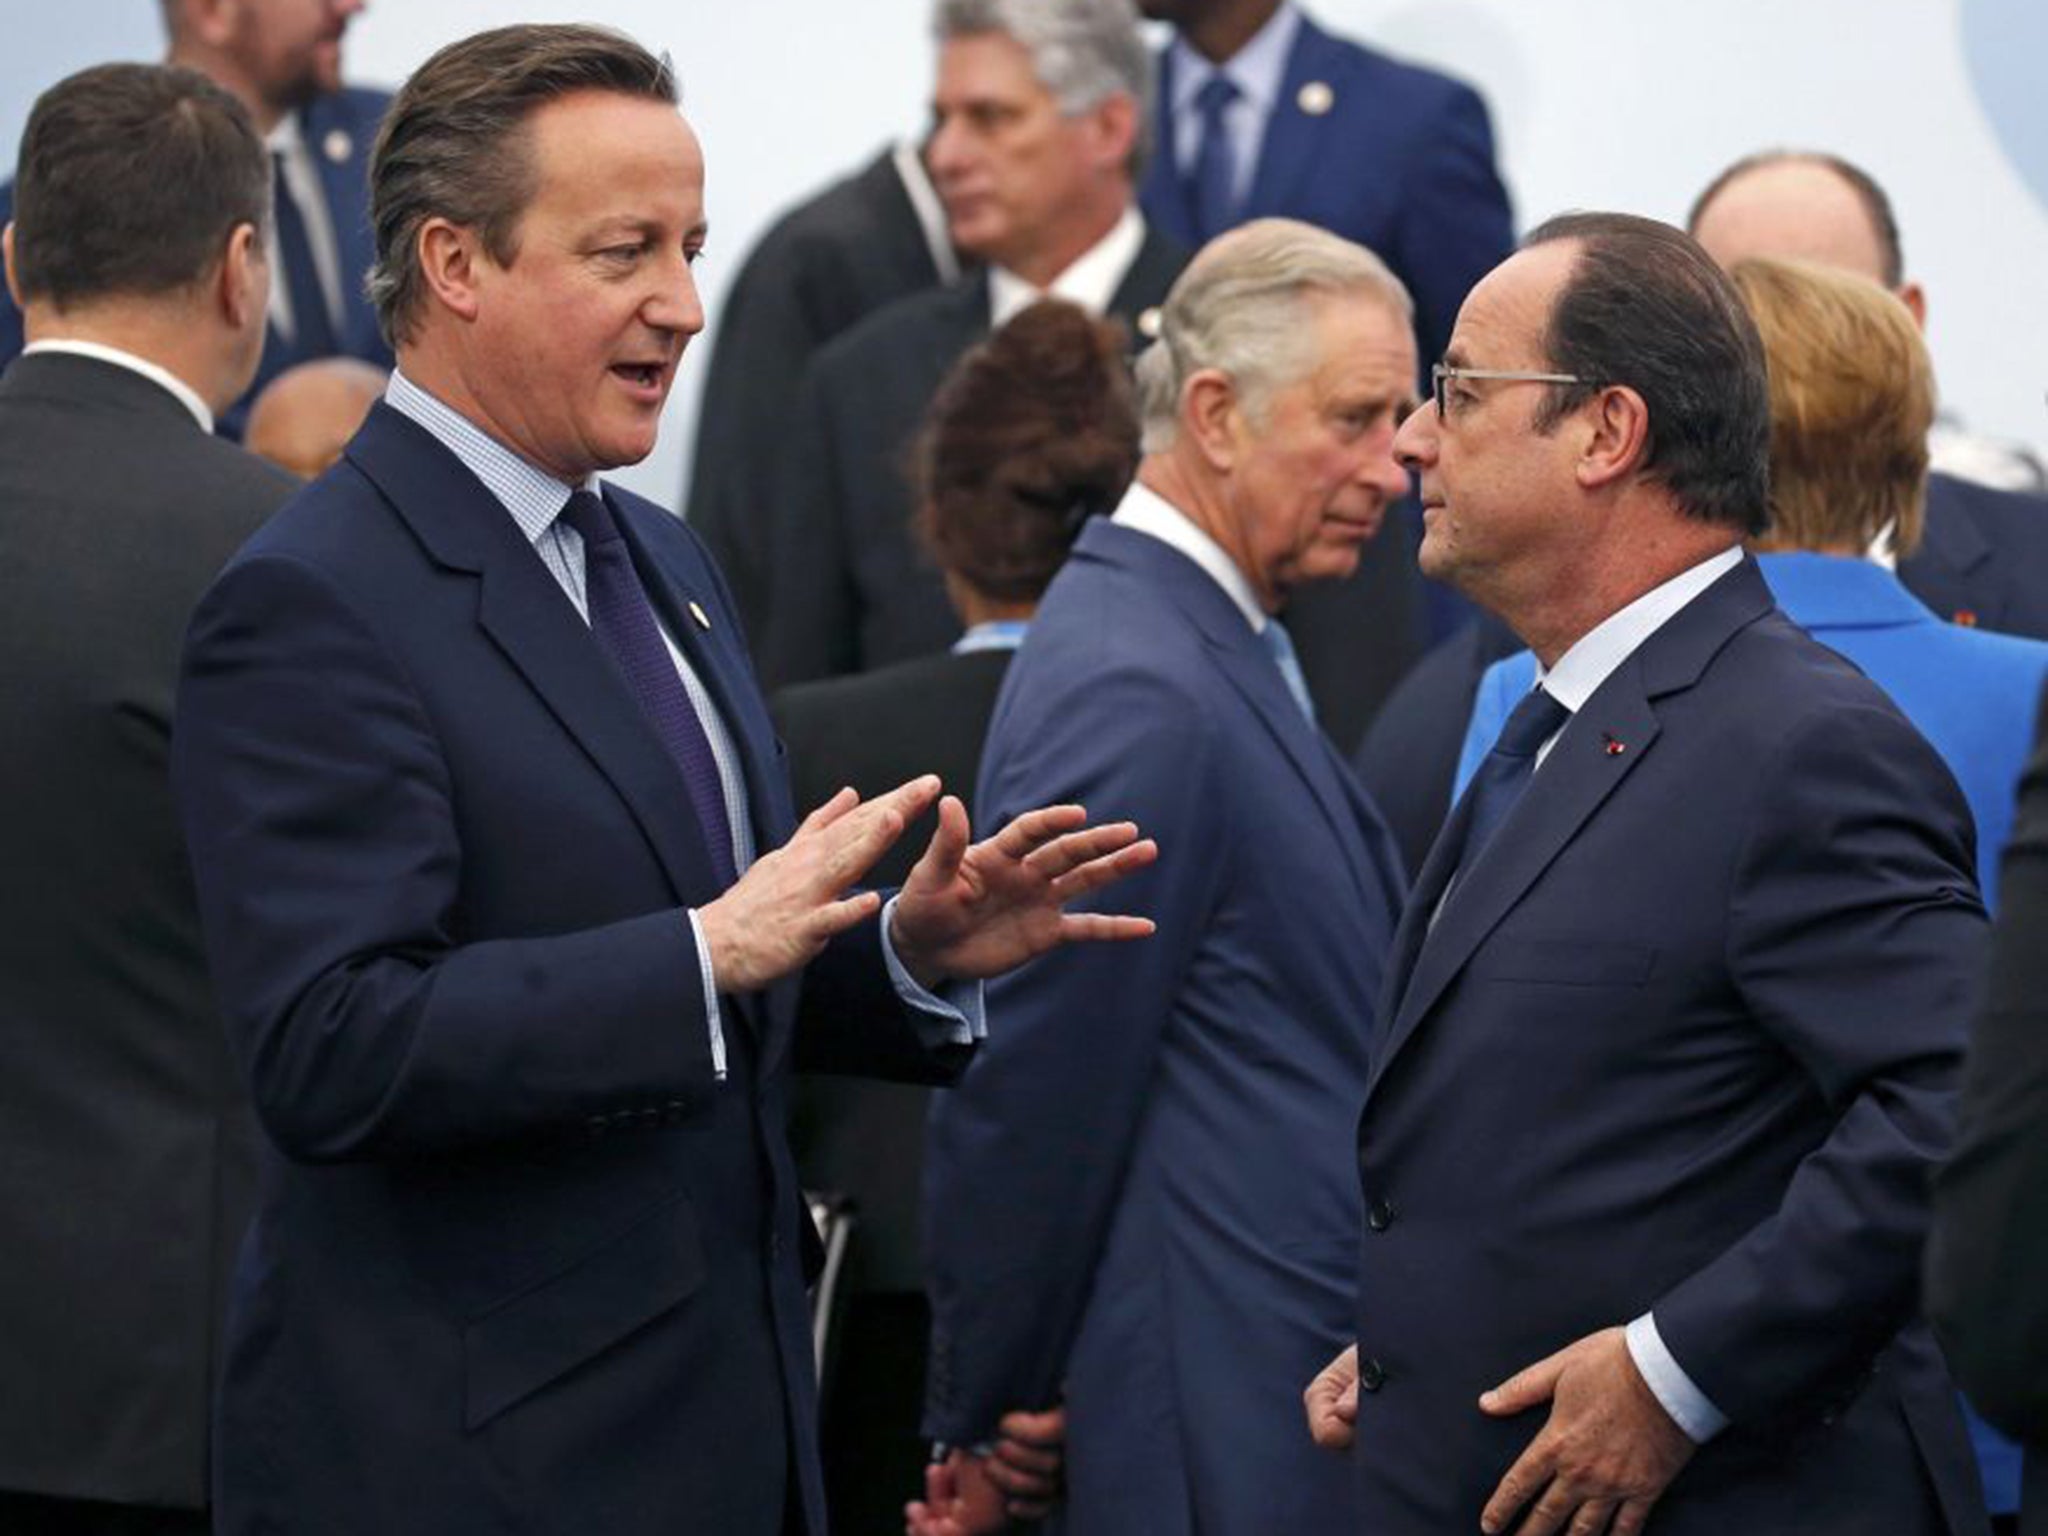 David Cameron talks to Francois Hollande as Prince Charles looks on in Paris